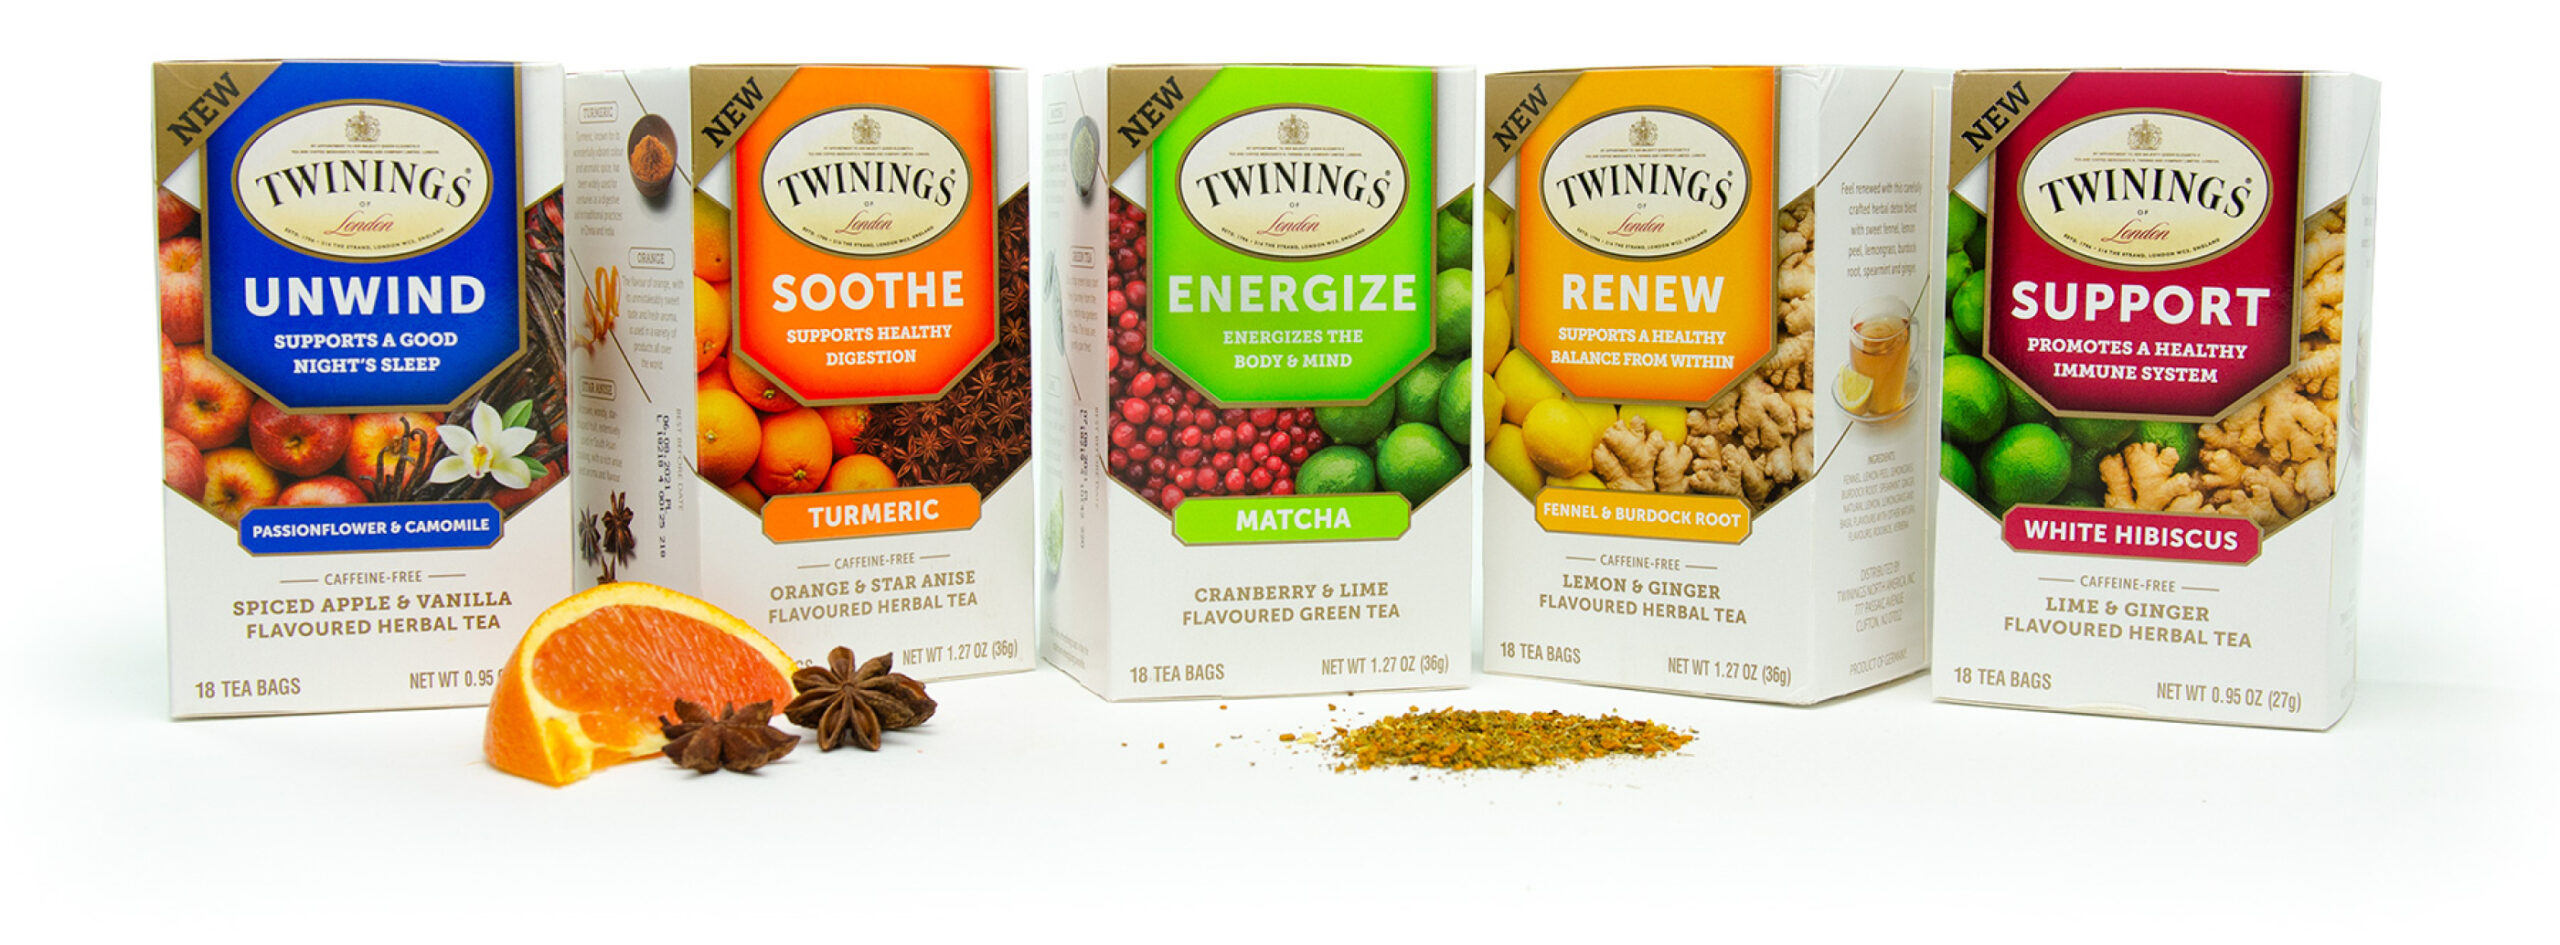 bailey-brand-consulting-twinings-wellness-teas-packaging